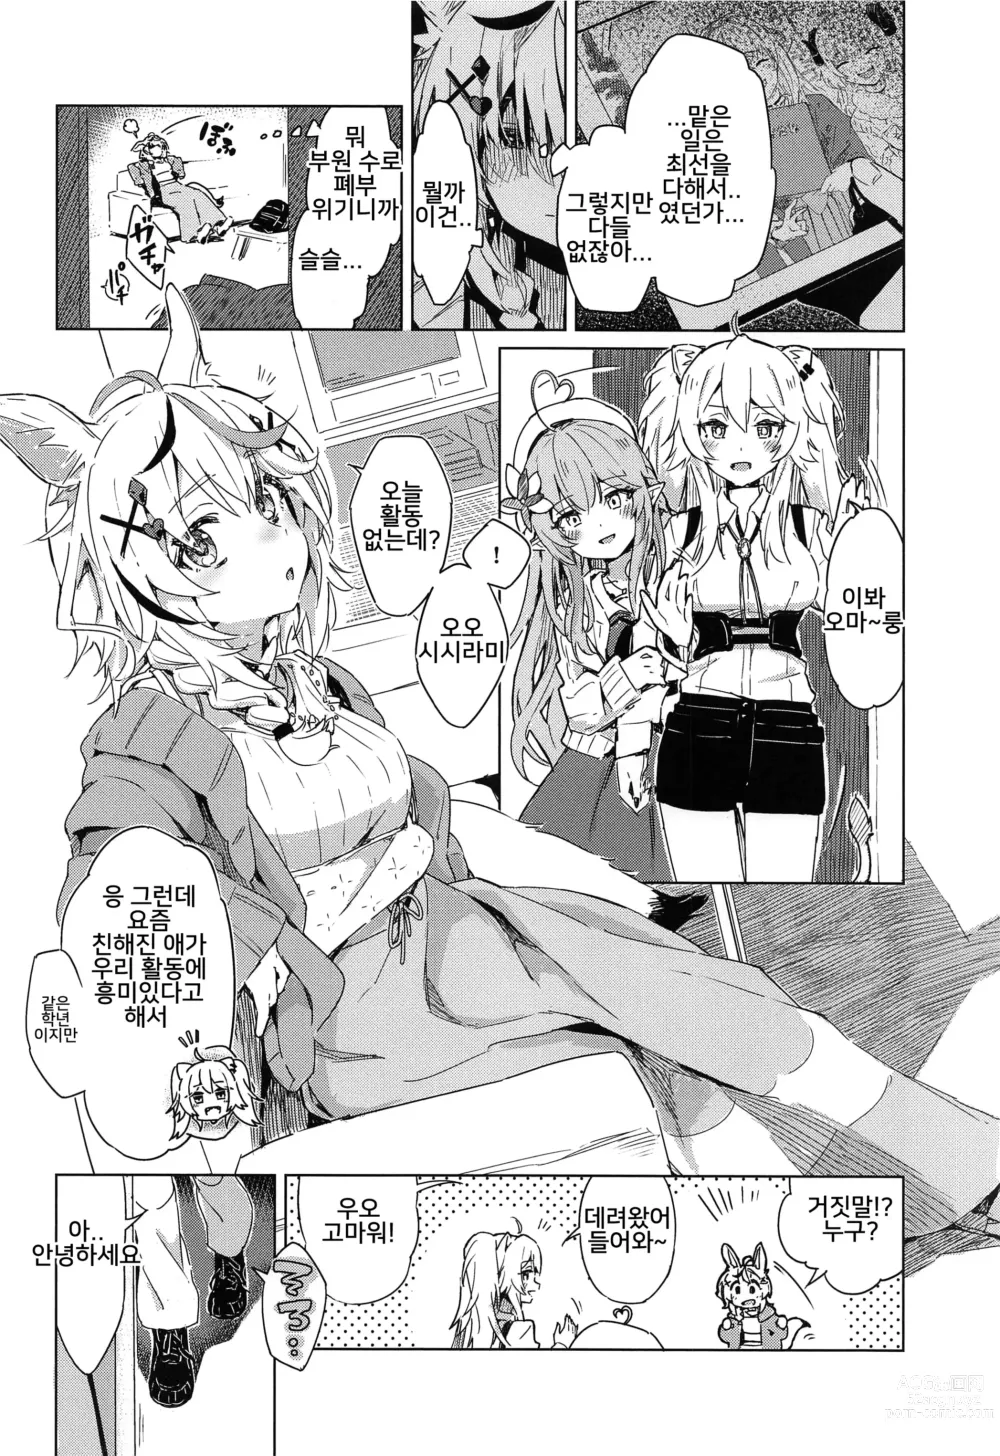 Page 3 of doujinshi Fennec wa Iseijin no Yume o Miru ka - Does The Fennec Dream of The Lovely Visitor?